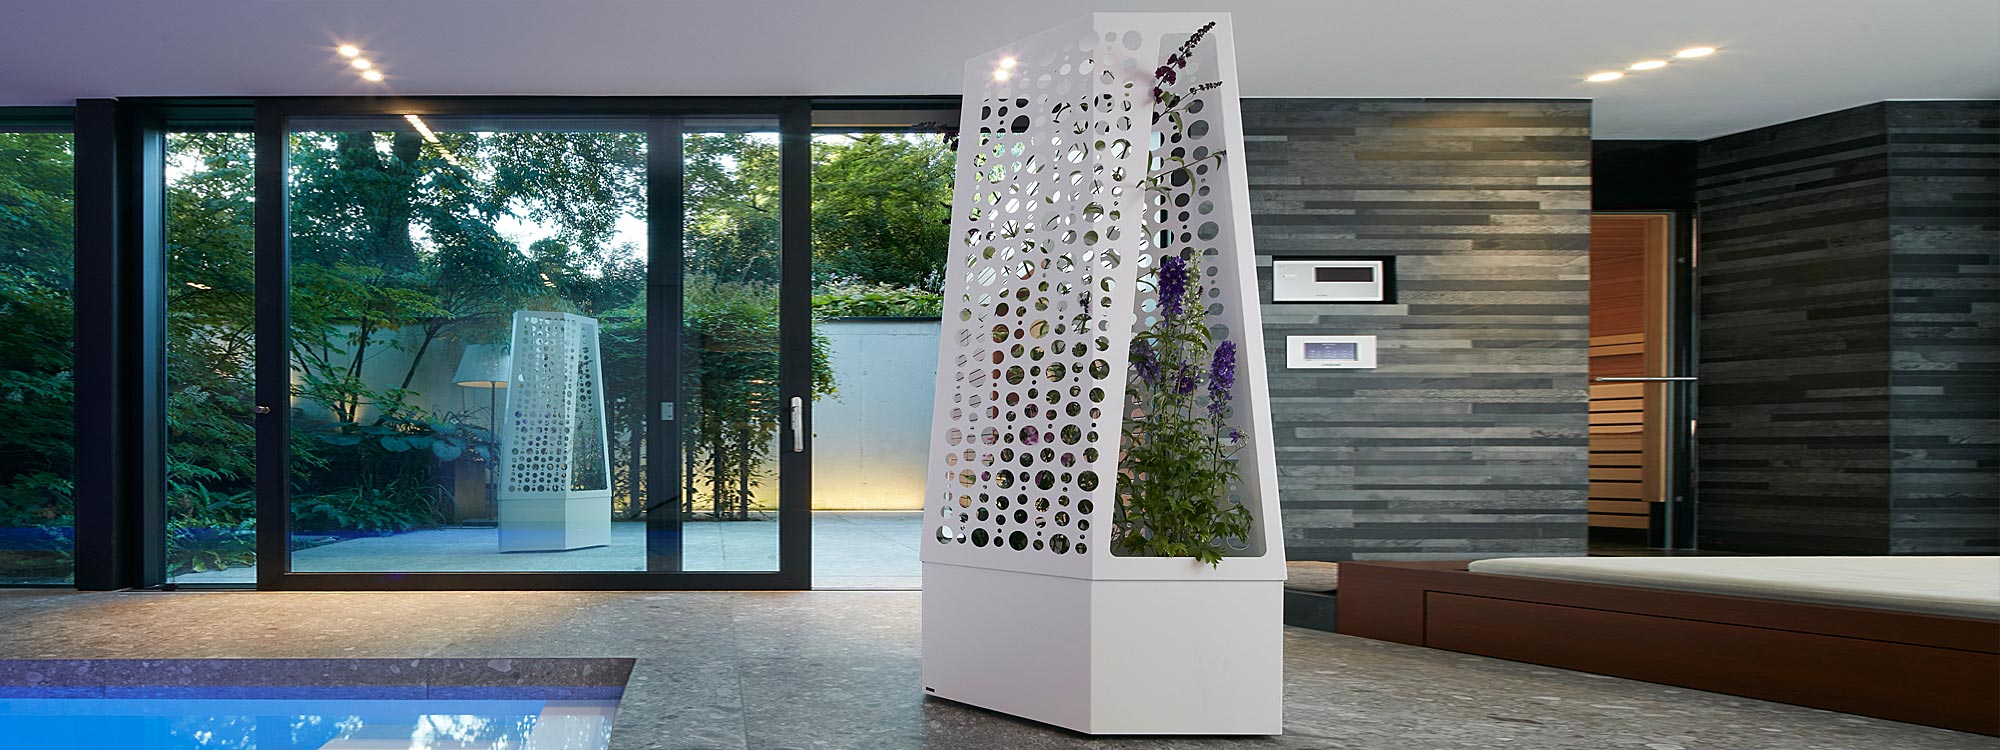 Image of Flora Air planter with trellis on wheels shown on indoor poolside, with another Air planter shown outside